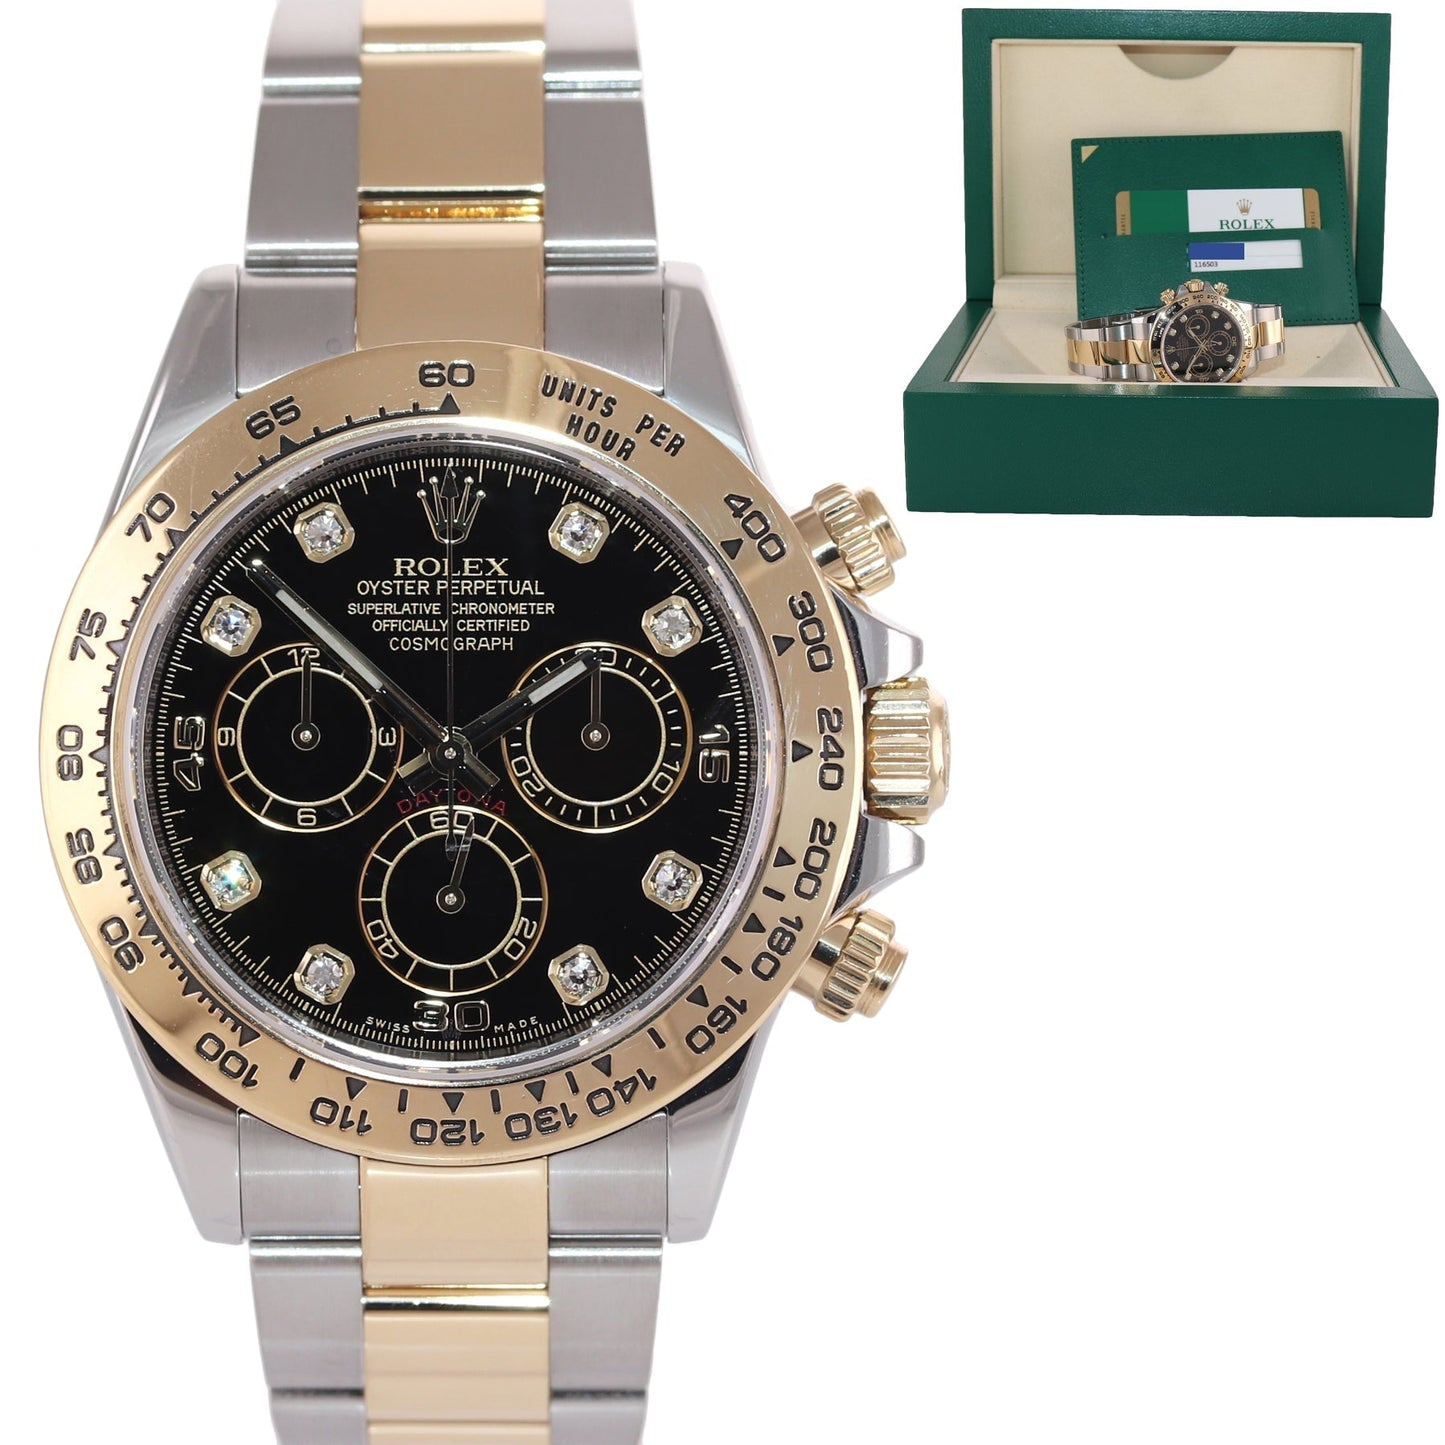 MINT PAPERS Black Diamond PAPERS 116503 Rolex Daytona Two Tone Steel Gold Watch